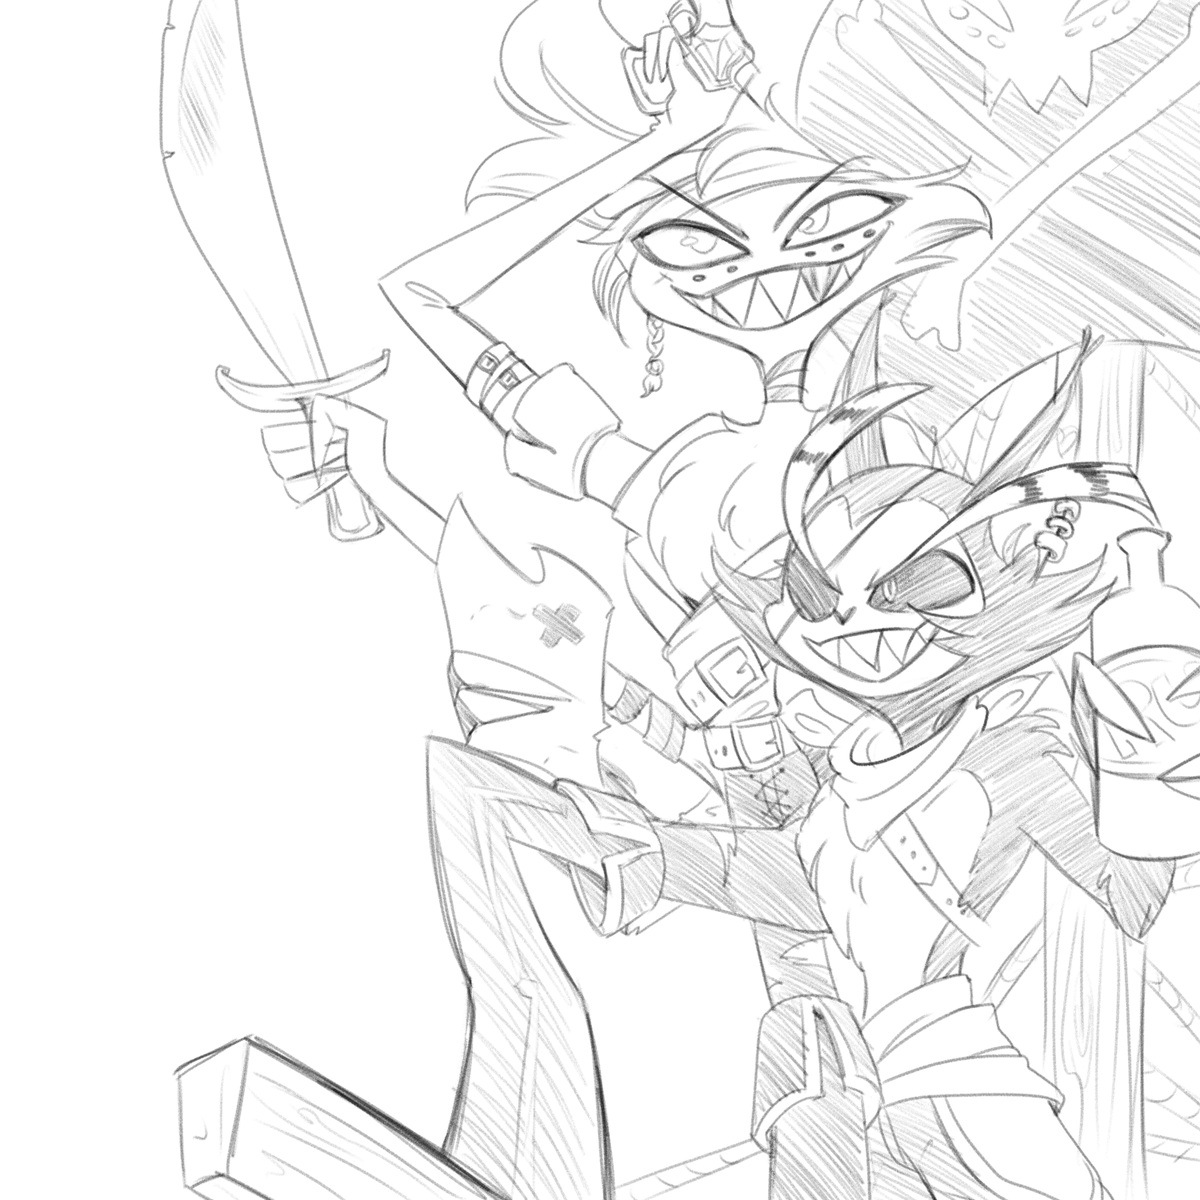 Day 4: Pirate  

I really should stop doing these so close to midnight. But sketching is fun.

#HazbinHotelHusk  #HazbinHotelAngelDust  #HazbinHotelHuskerdust #ArtChallenge #sketch